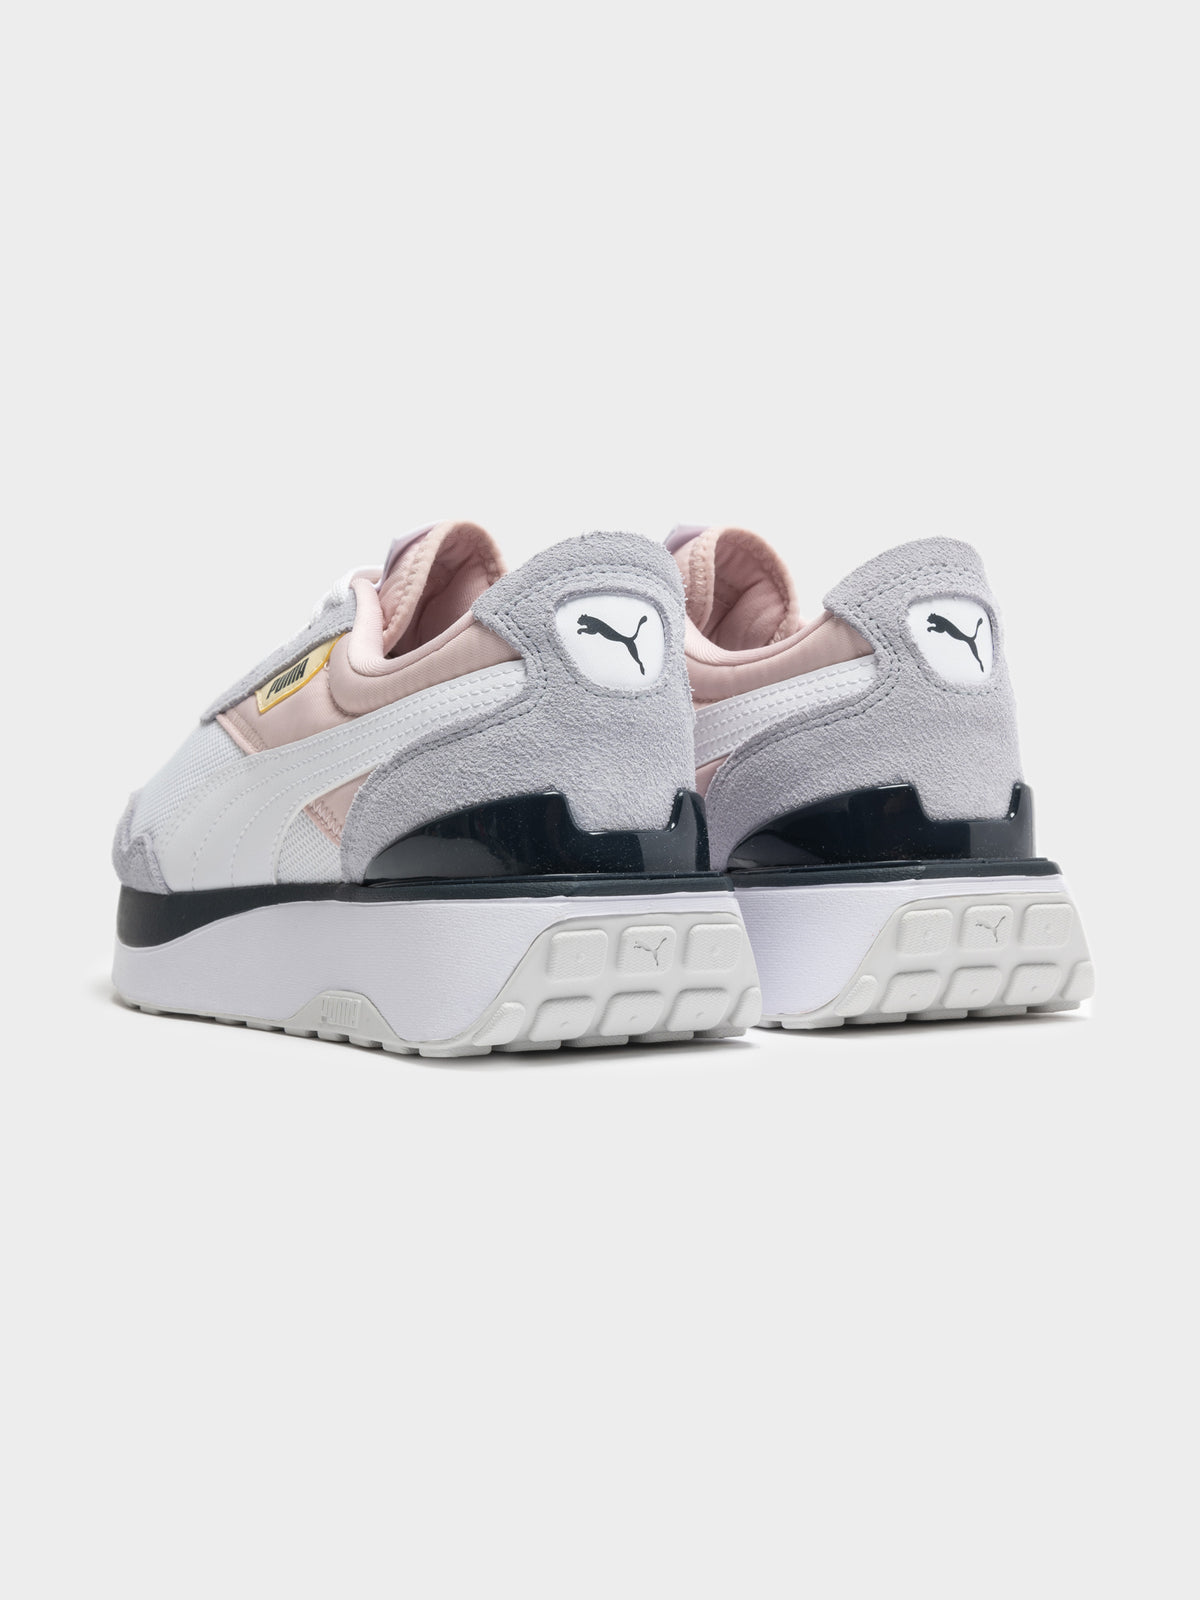 Womens Cruise Rider Sneaker in White &amp; Pink